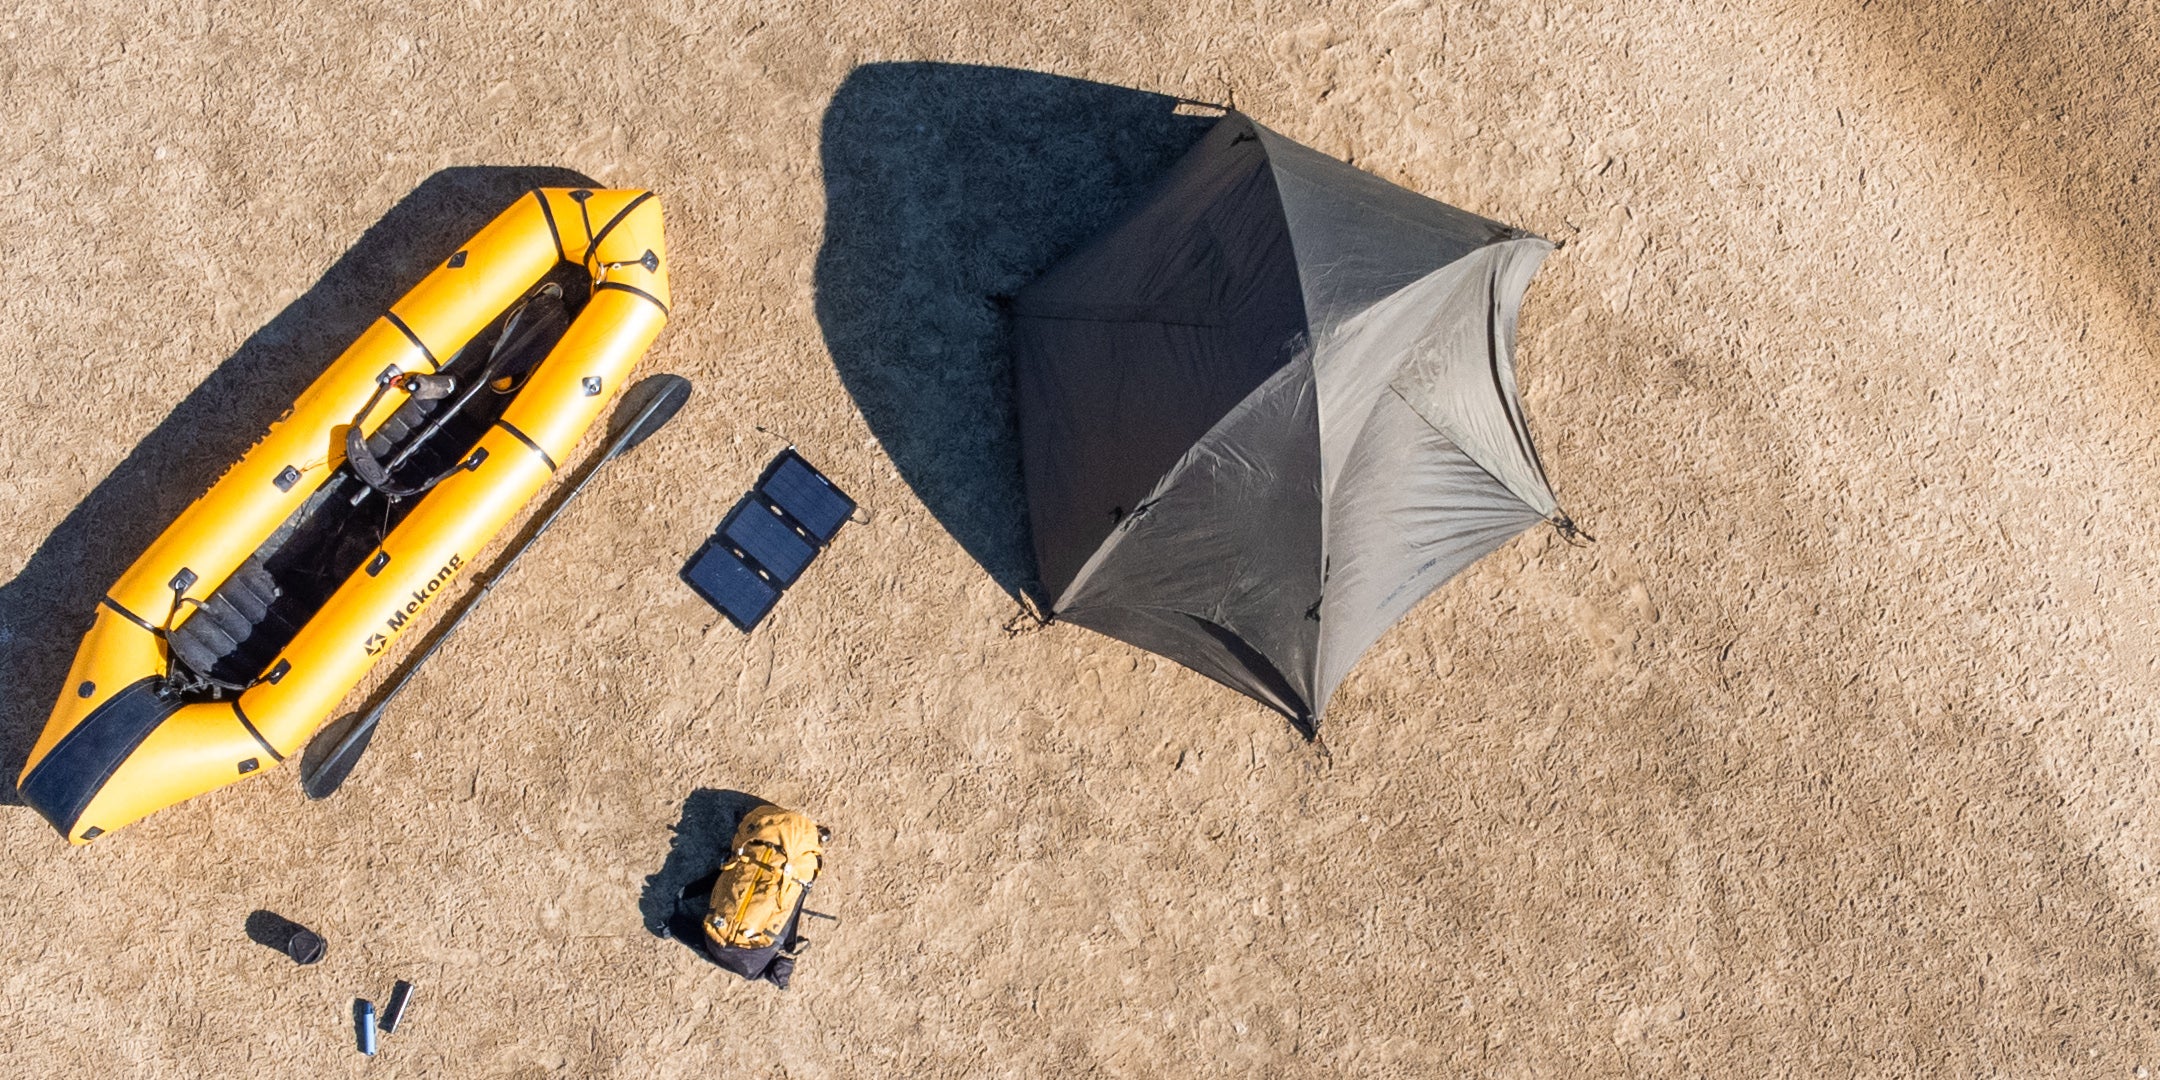 18 Watt solar panel next to a raft and tent for hiking 